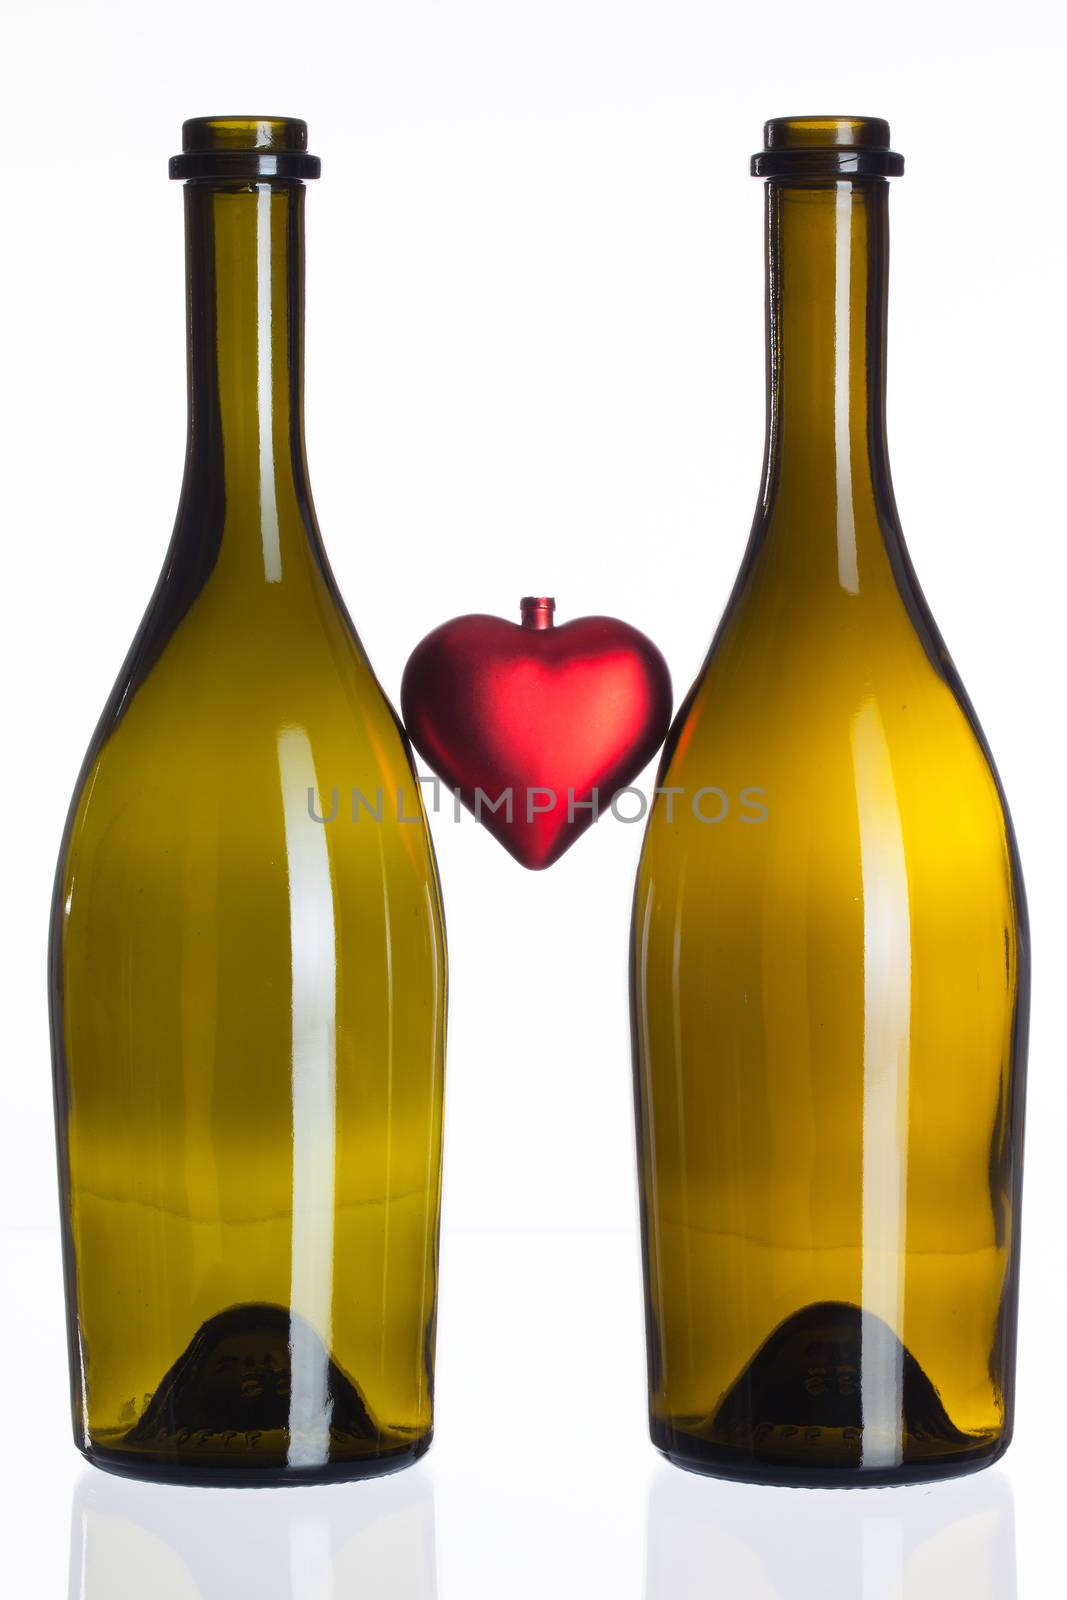 Empty bottles of wine and love symbol by CaptureLight